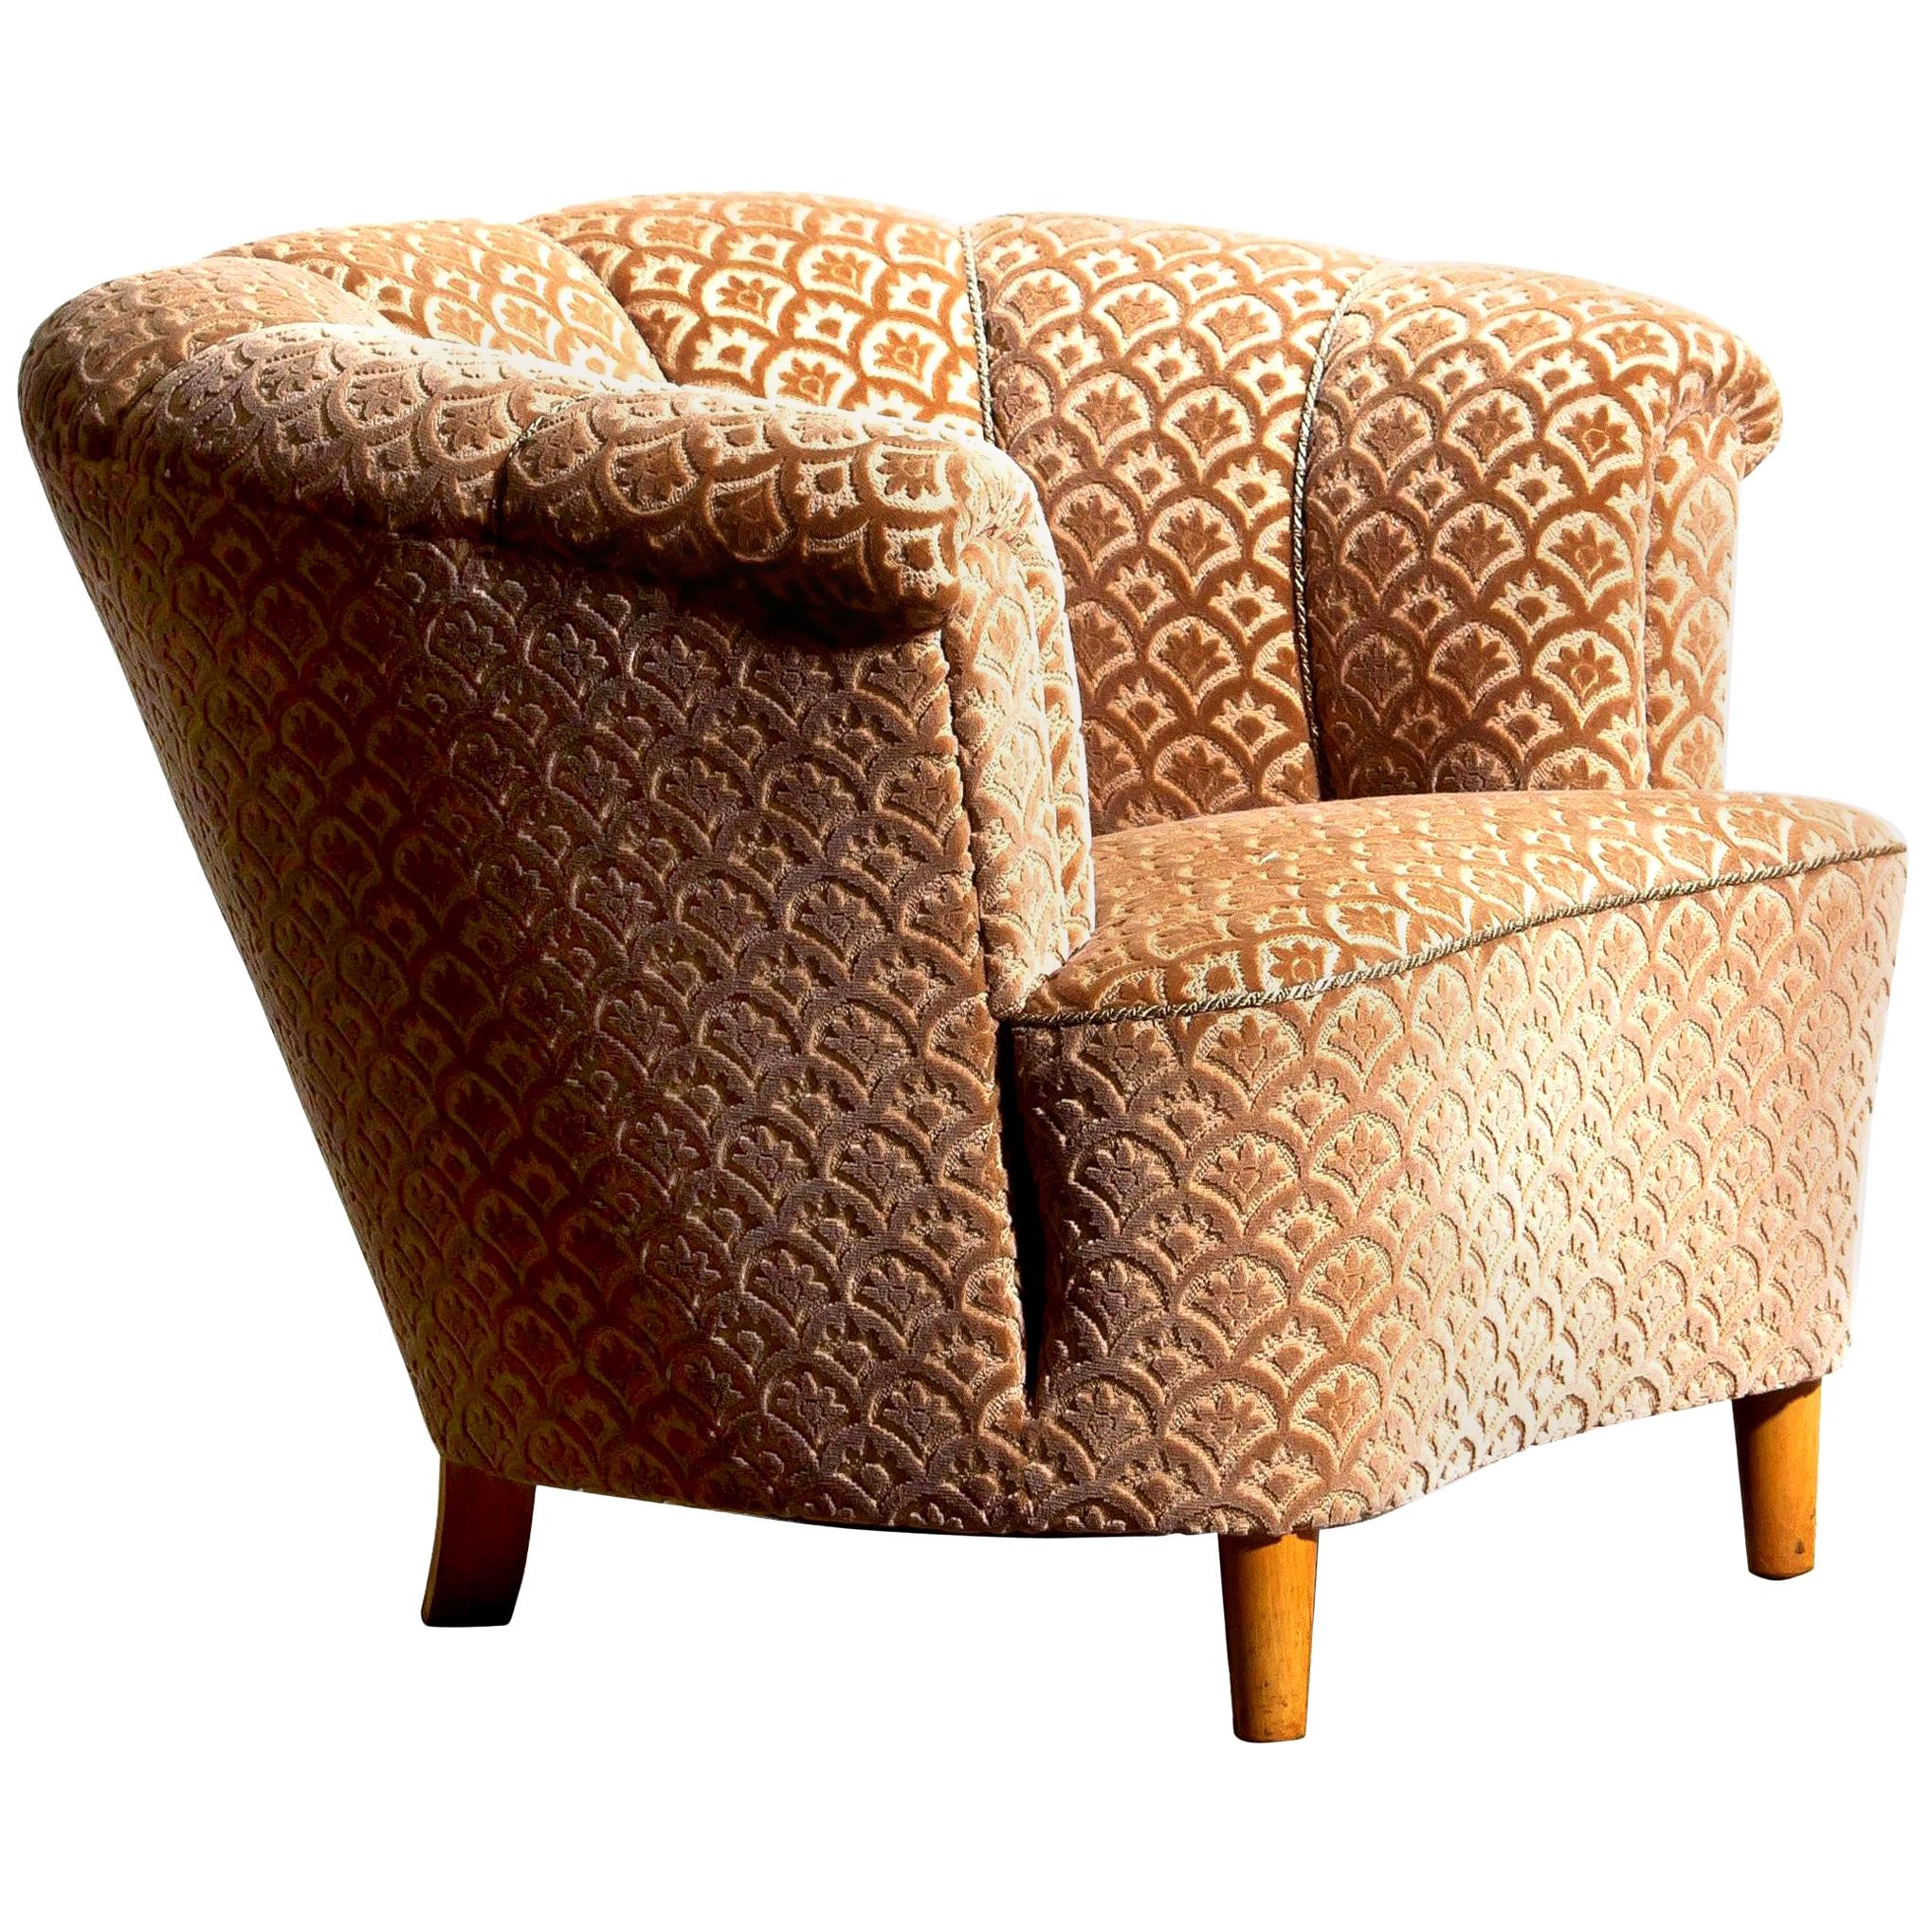 1940s, Velvet Jacquard Club Lounge Cocktail Chair from Sweden